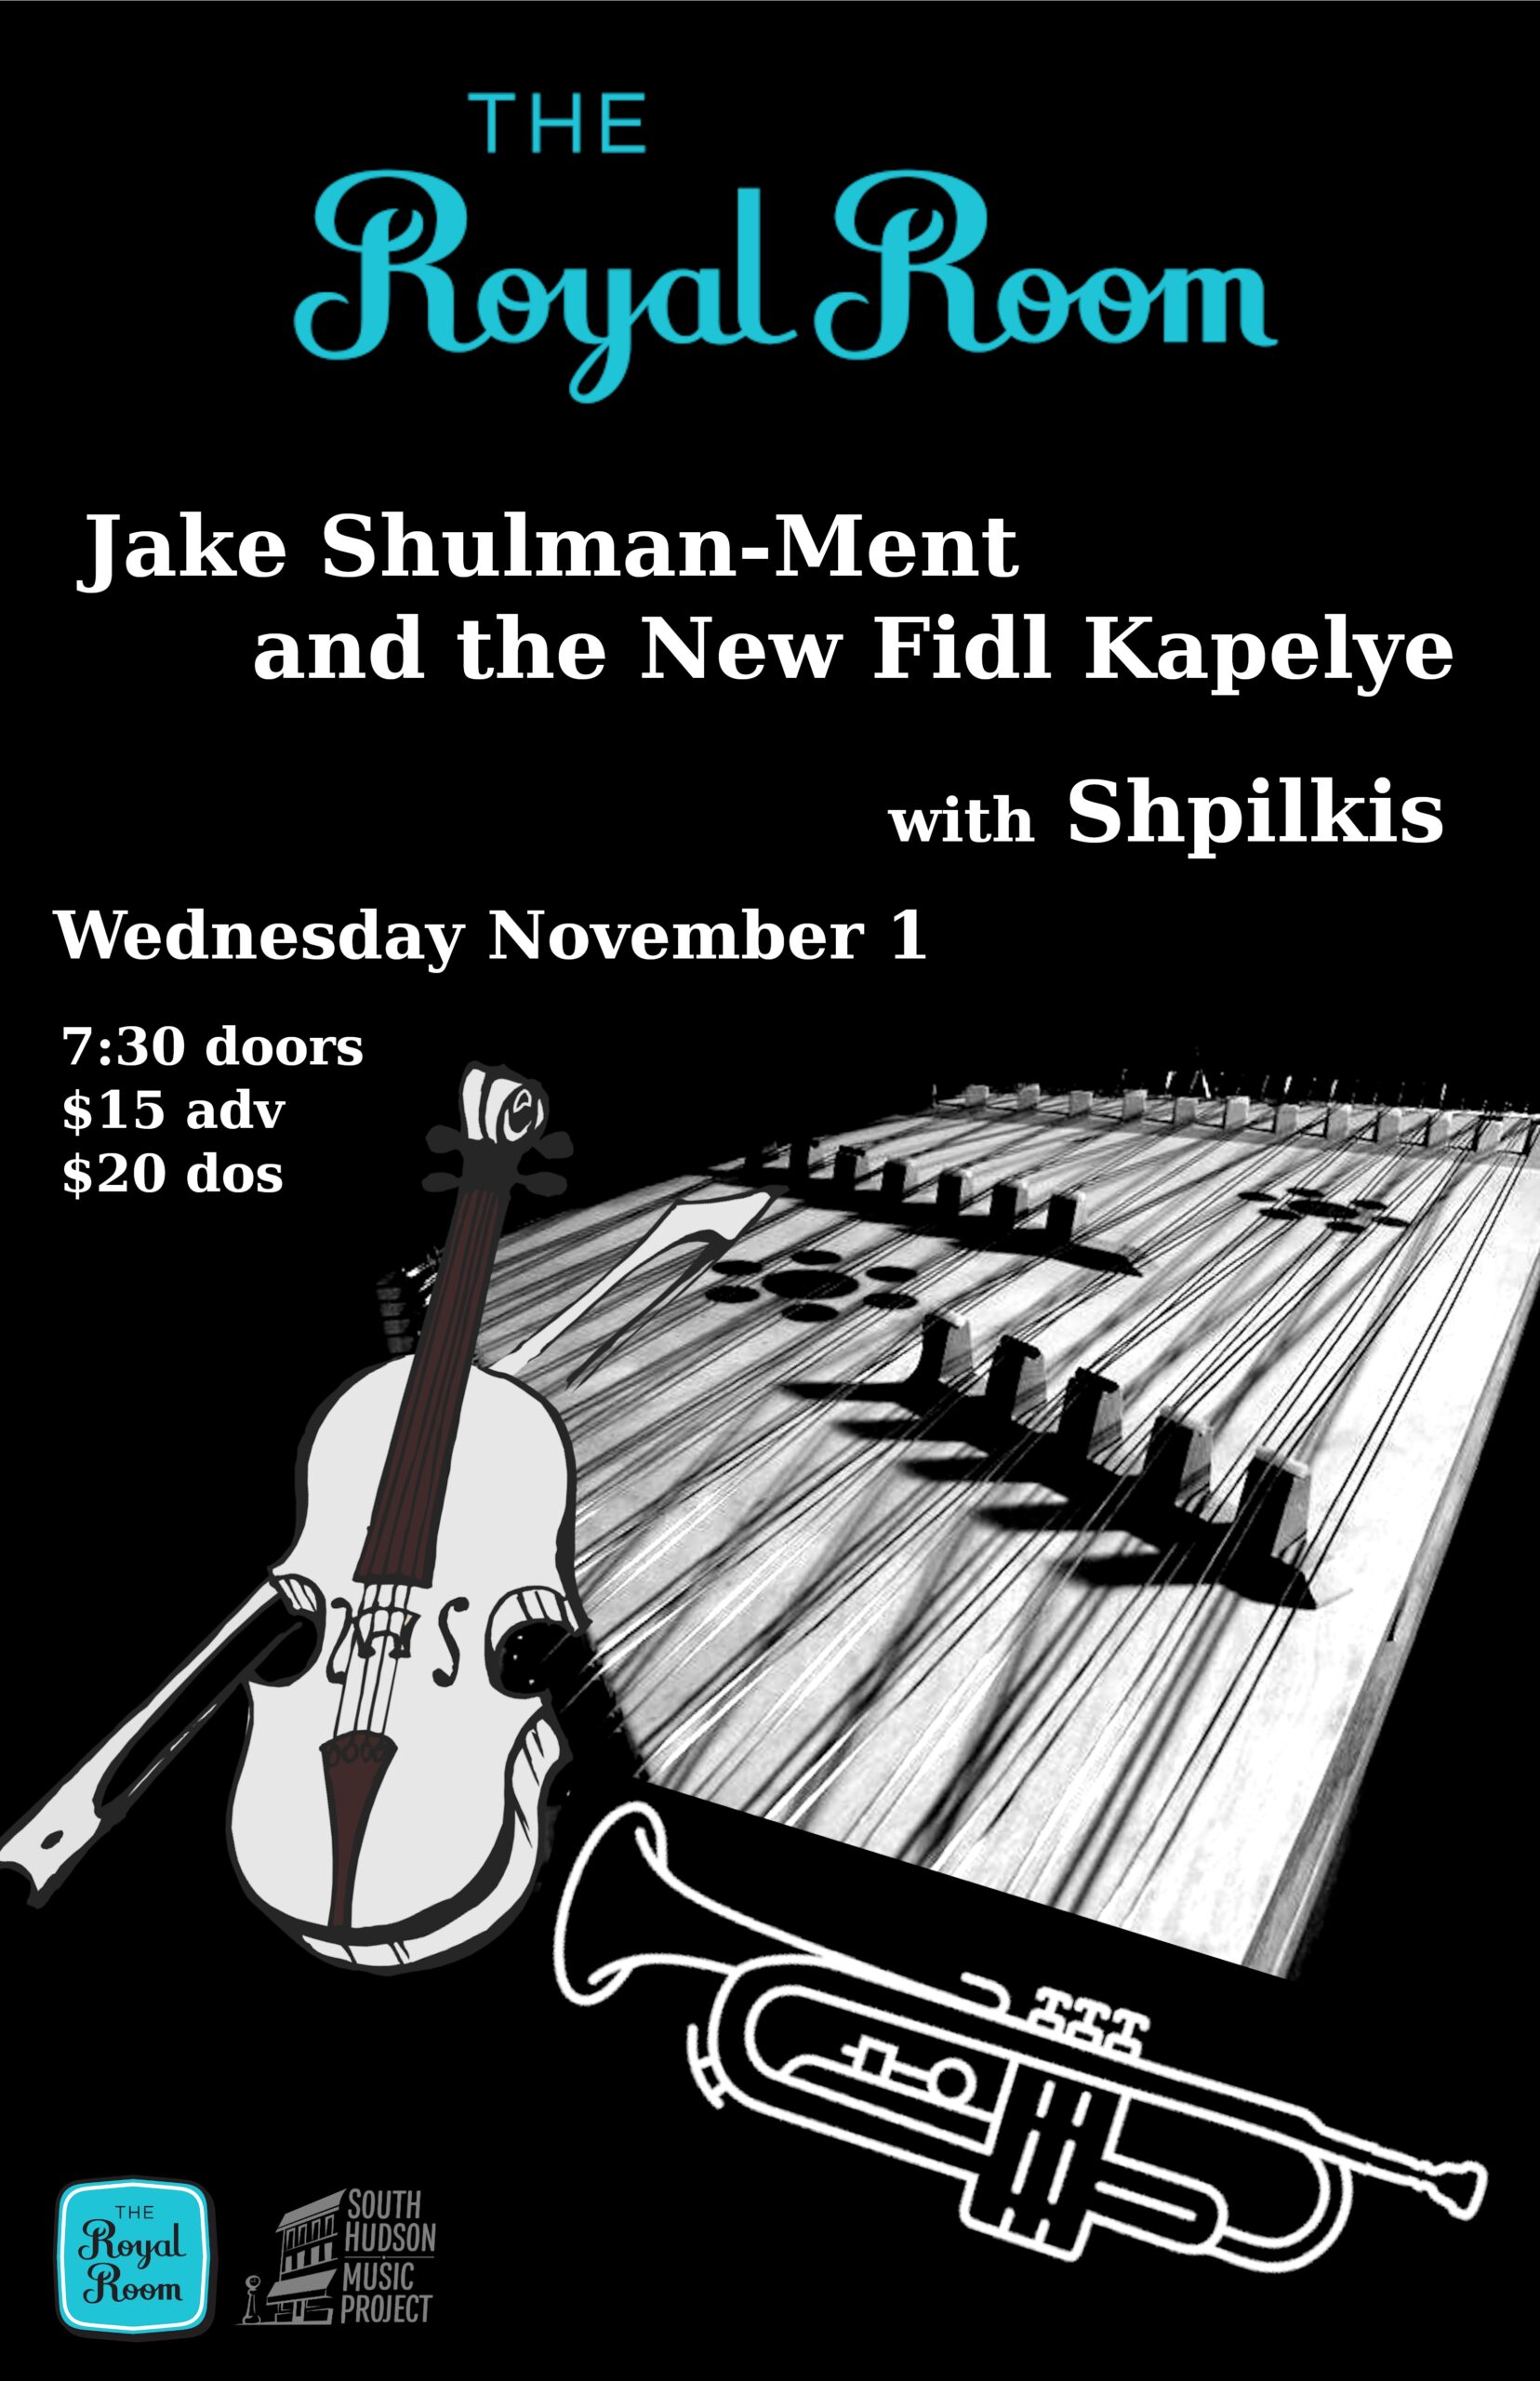 Jake Shulman-Ment and the New Fidl Kapelye with Shpilkis!